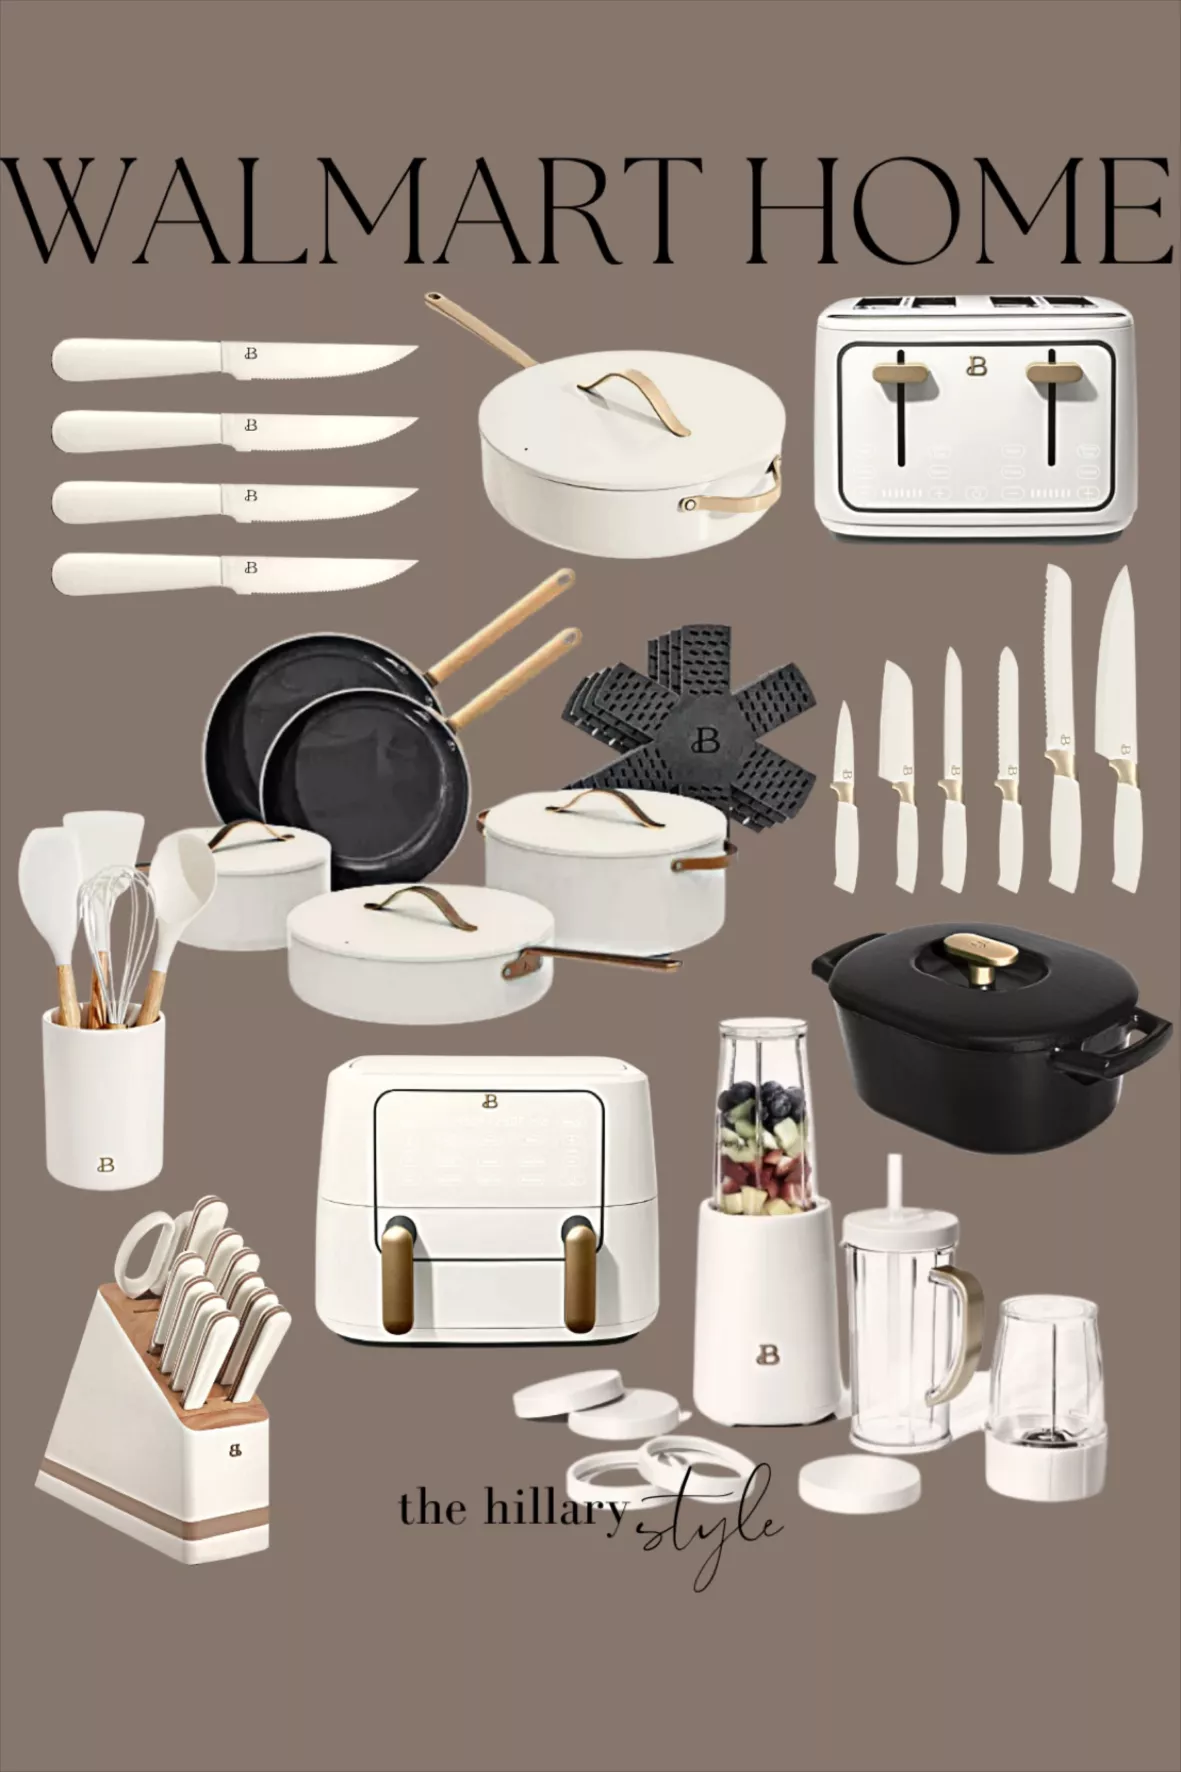 Beautiful 12-piece Forged Kitchen Knife Set in White with Wood Storage Block,  by Drew Barrymore 